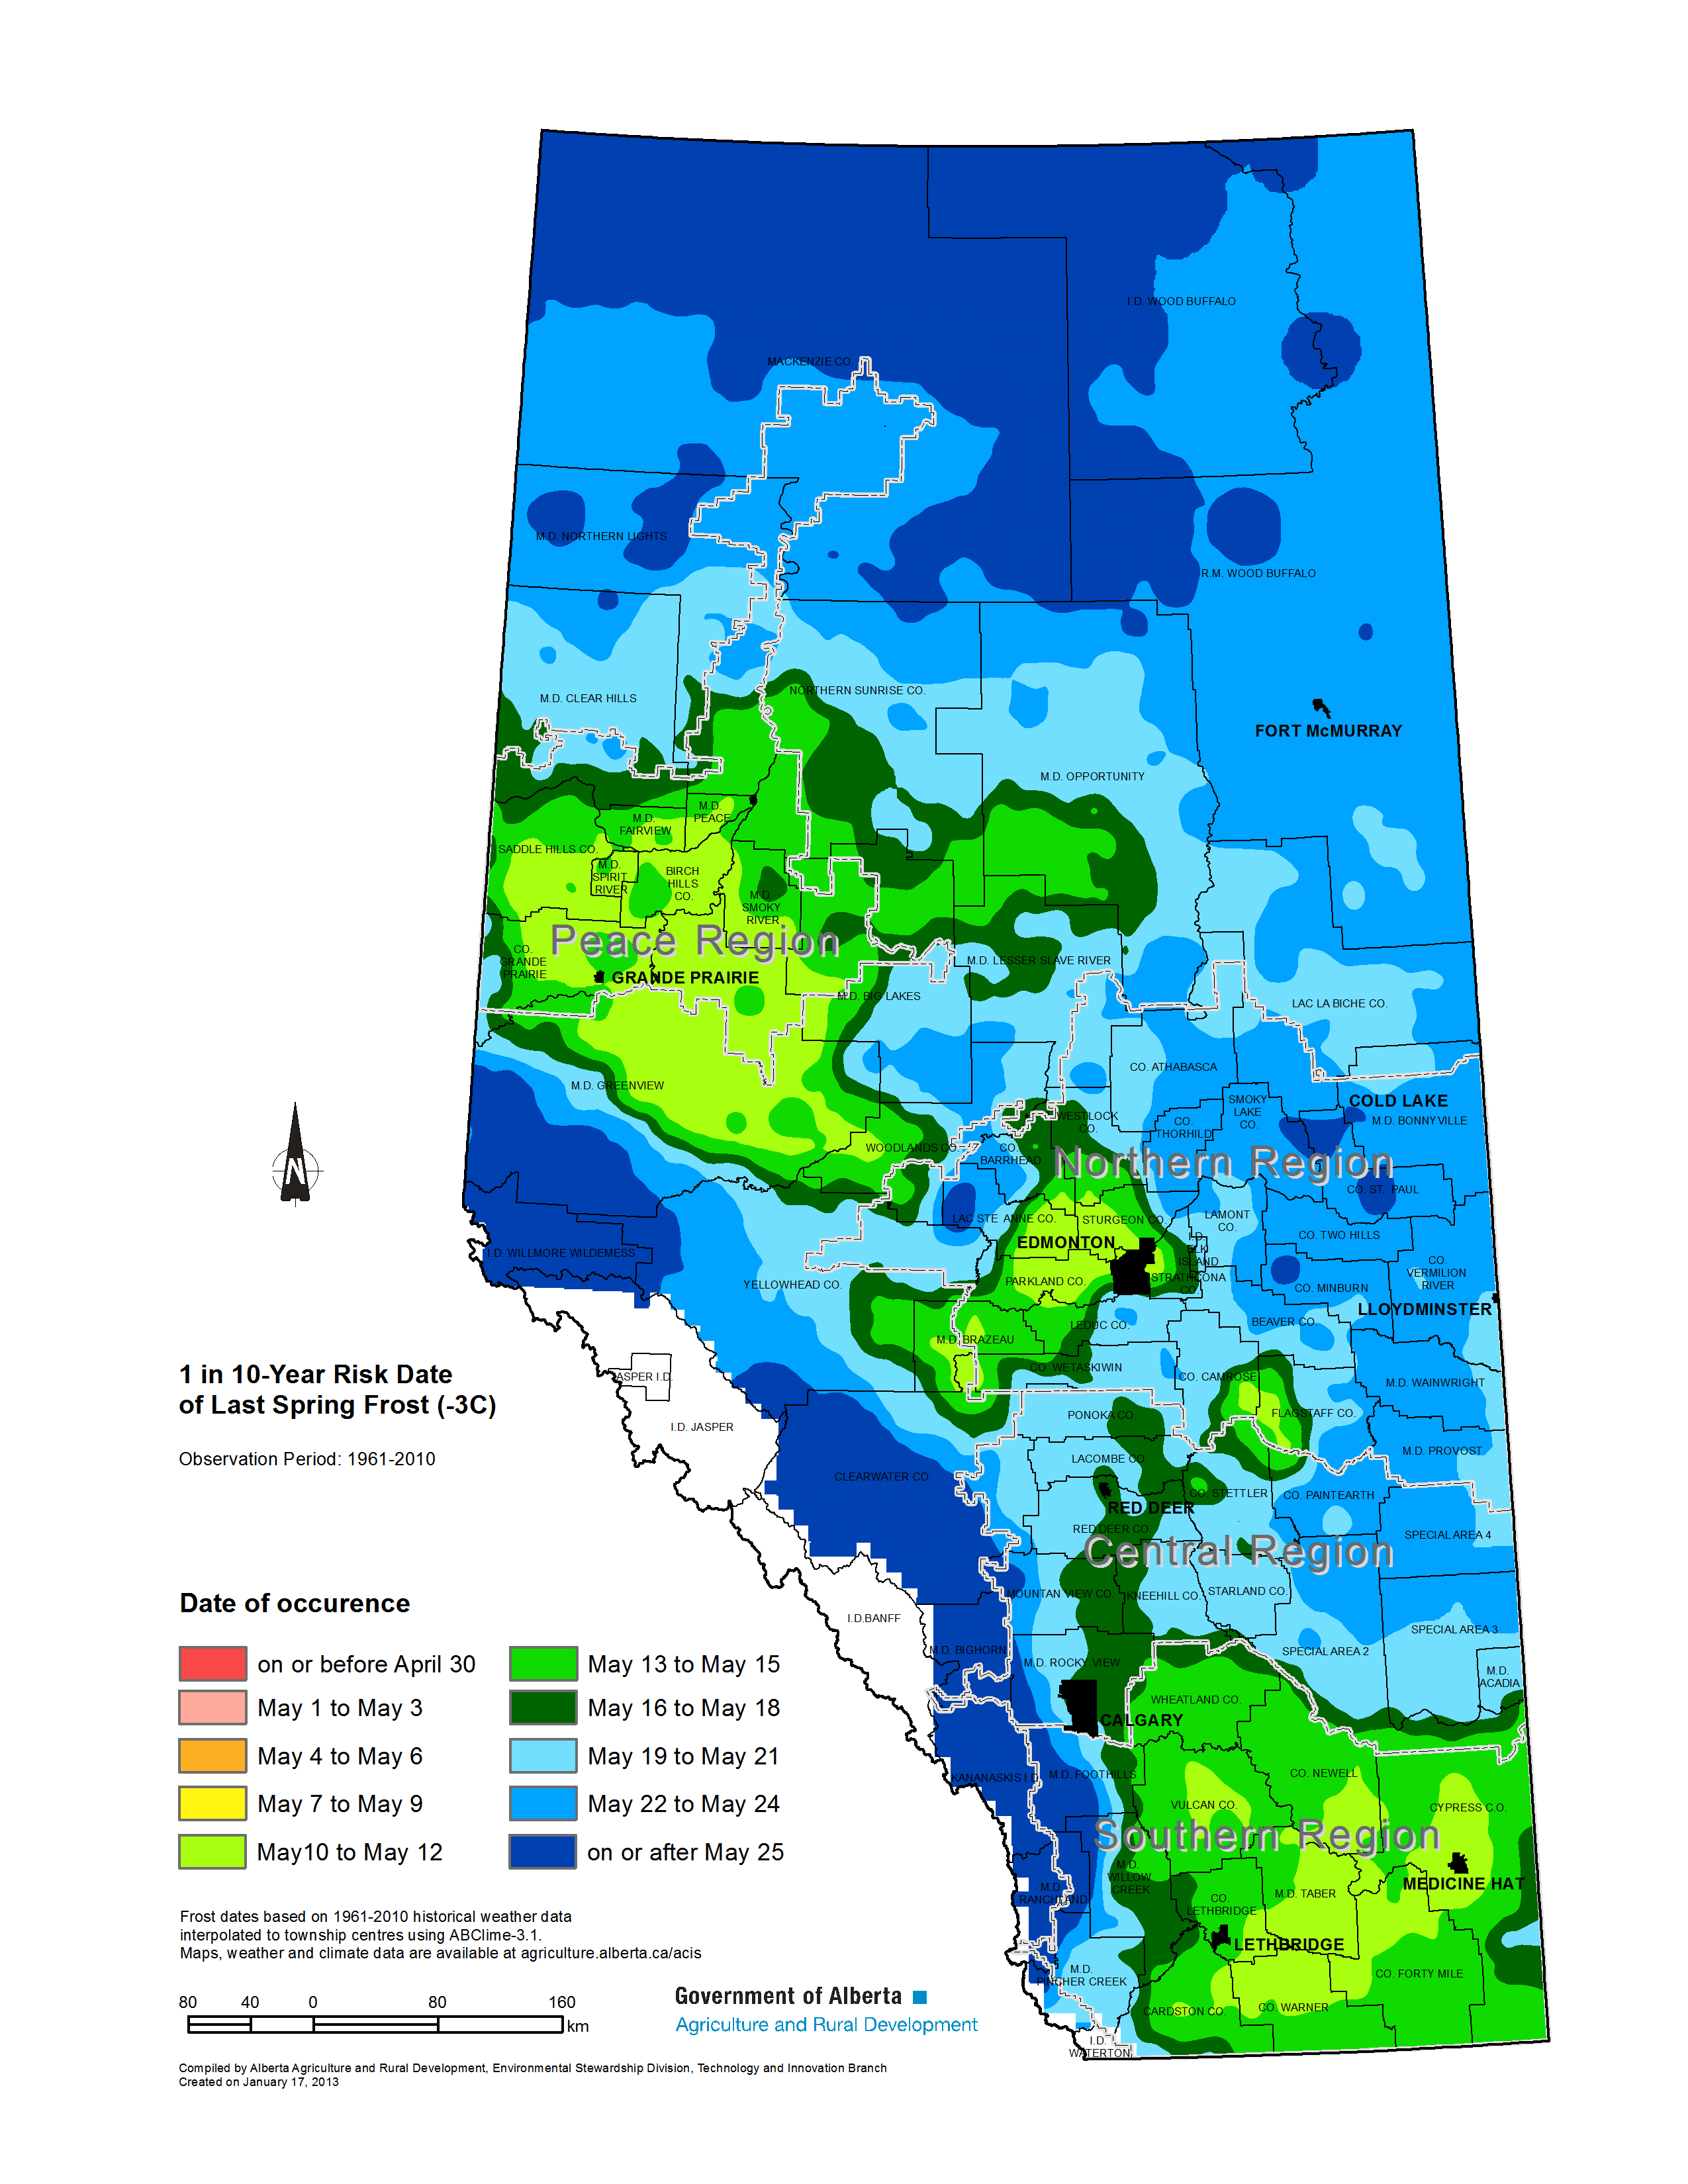 One year in 10 (10% probability) the last -3°C frost in Alberta will occur on or after these dates.